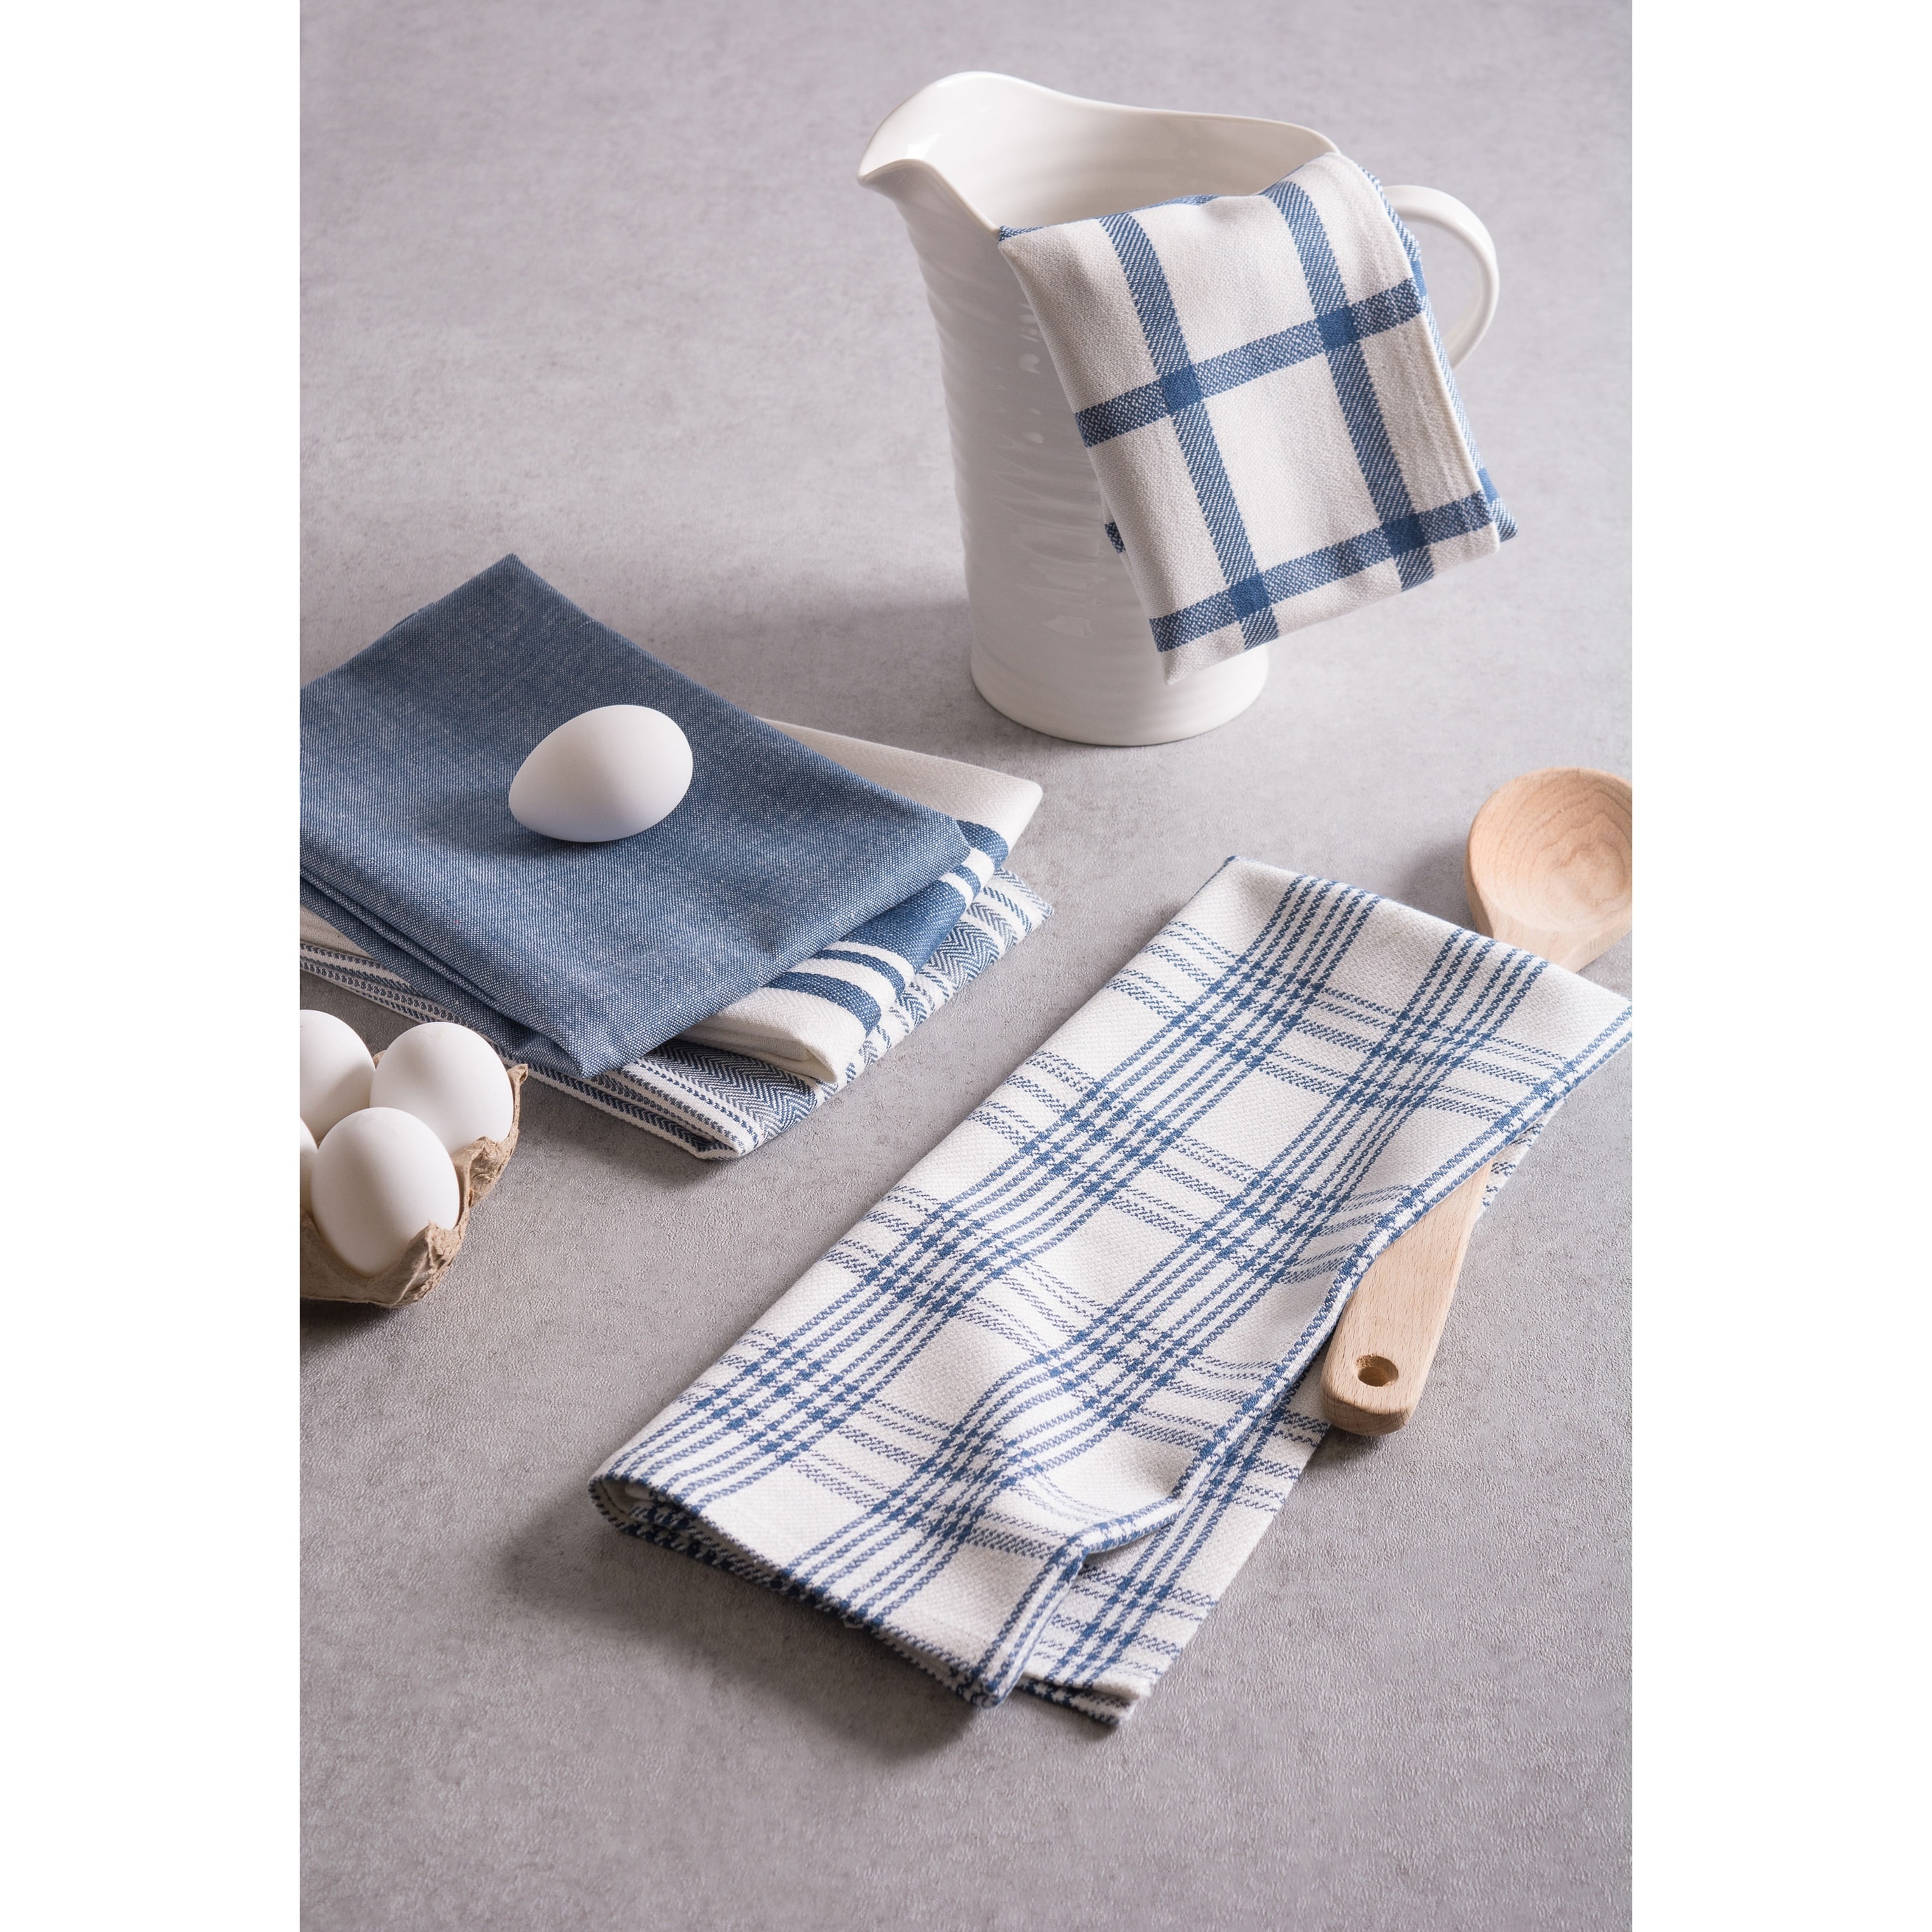 https://ak1.ostkcdn.com/images/products/is/images/direct/f51c3fcfcb3119721ad78e2d70c8aa5396771b0a/Design-Imports-Assorted-Woven-Dishtowel-Set-of-5-%2828-inches-long-x-18-inches-wide%29.jpg